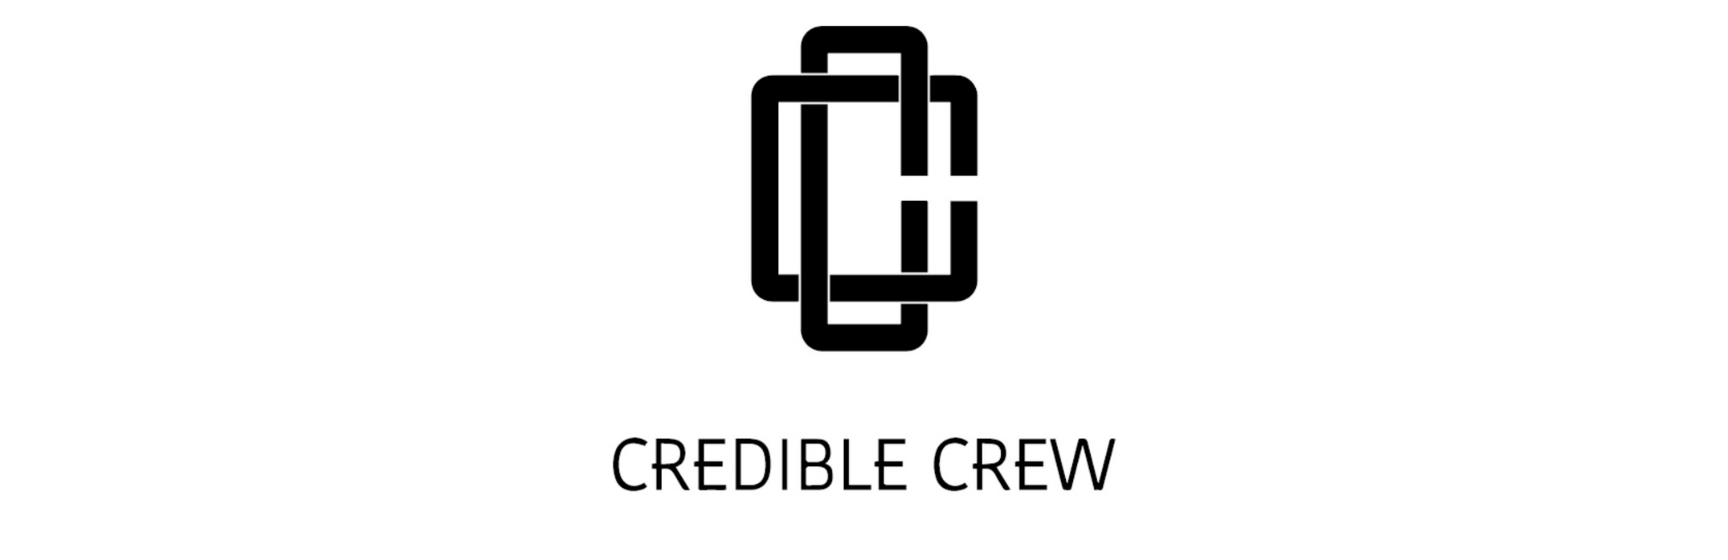 Credible Crew achieves transparency and structure with Delogue PLM